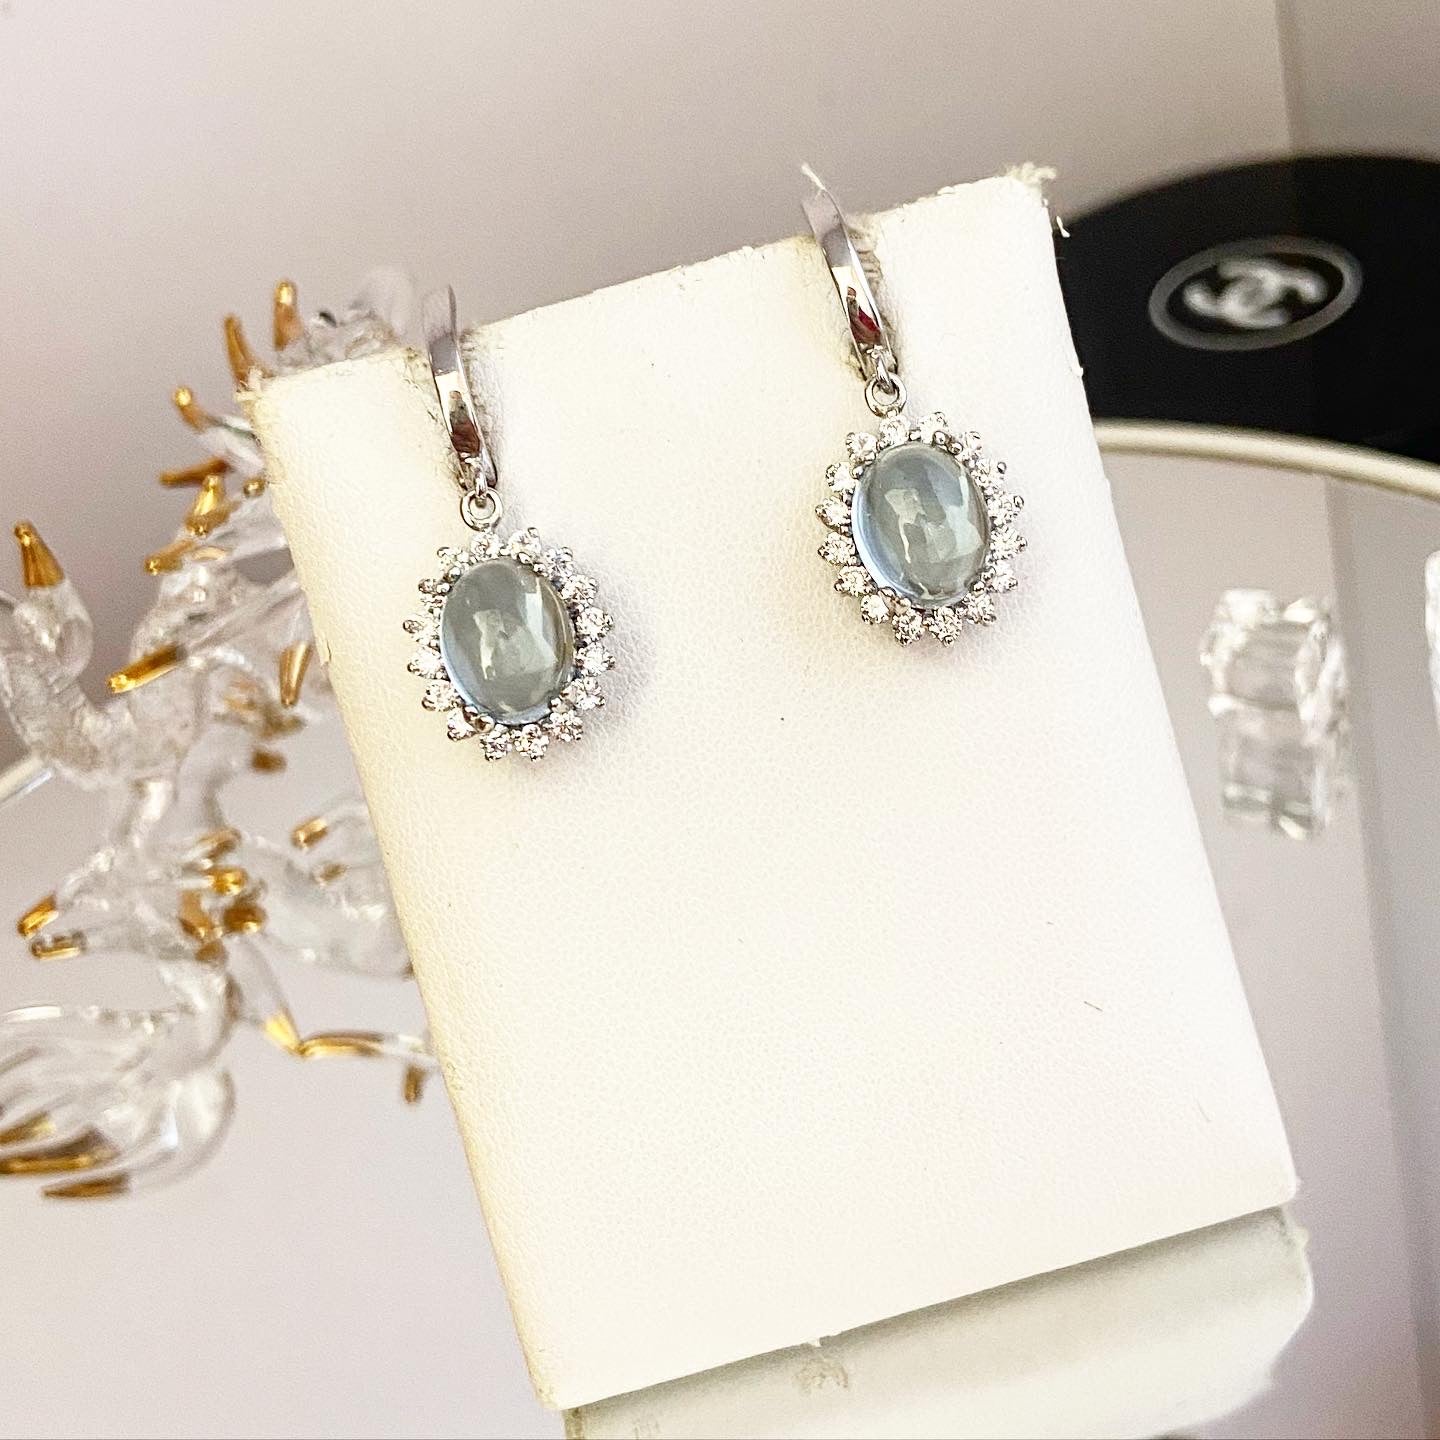 Classic earrings with topaz